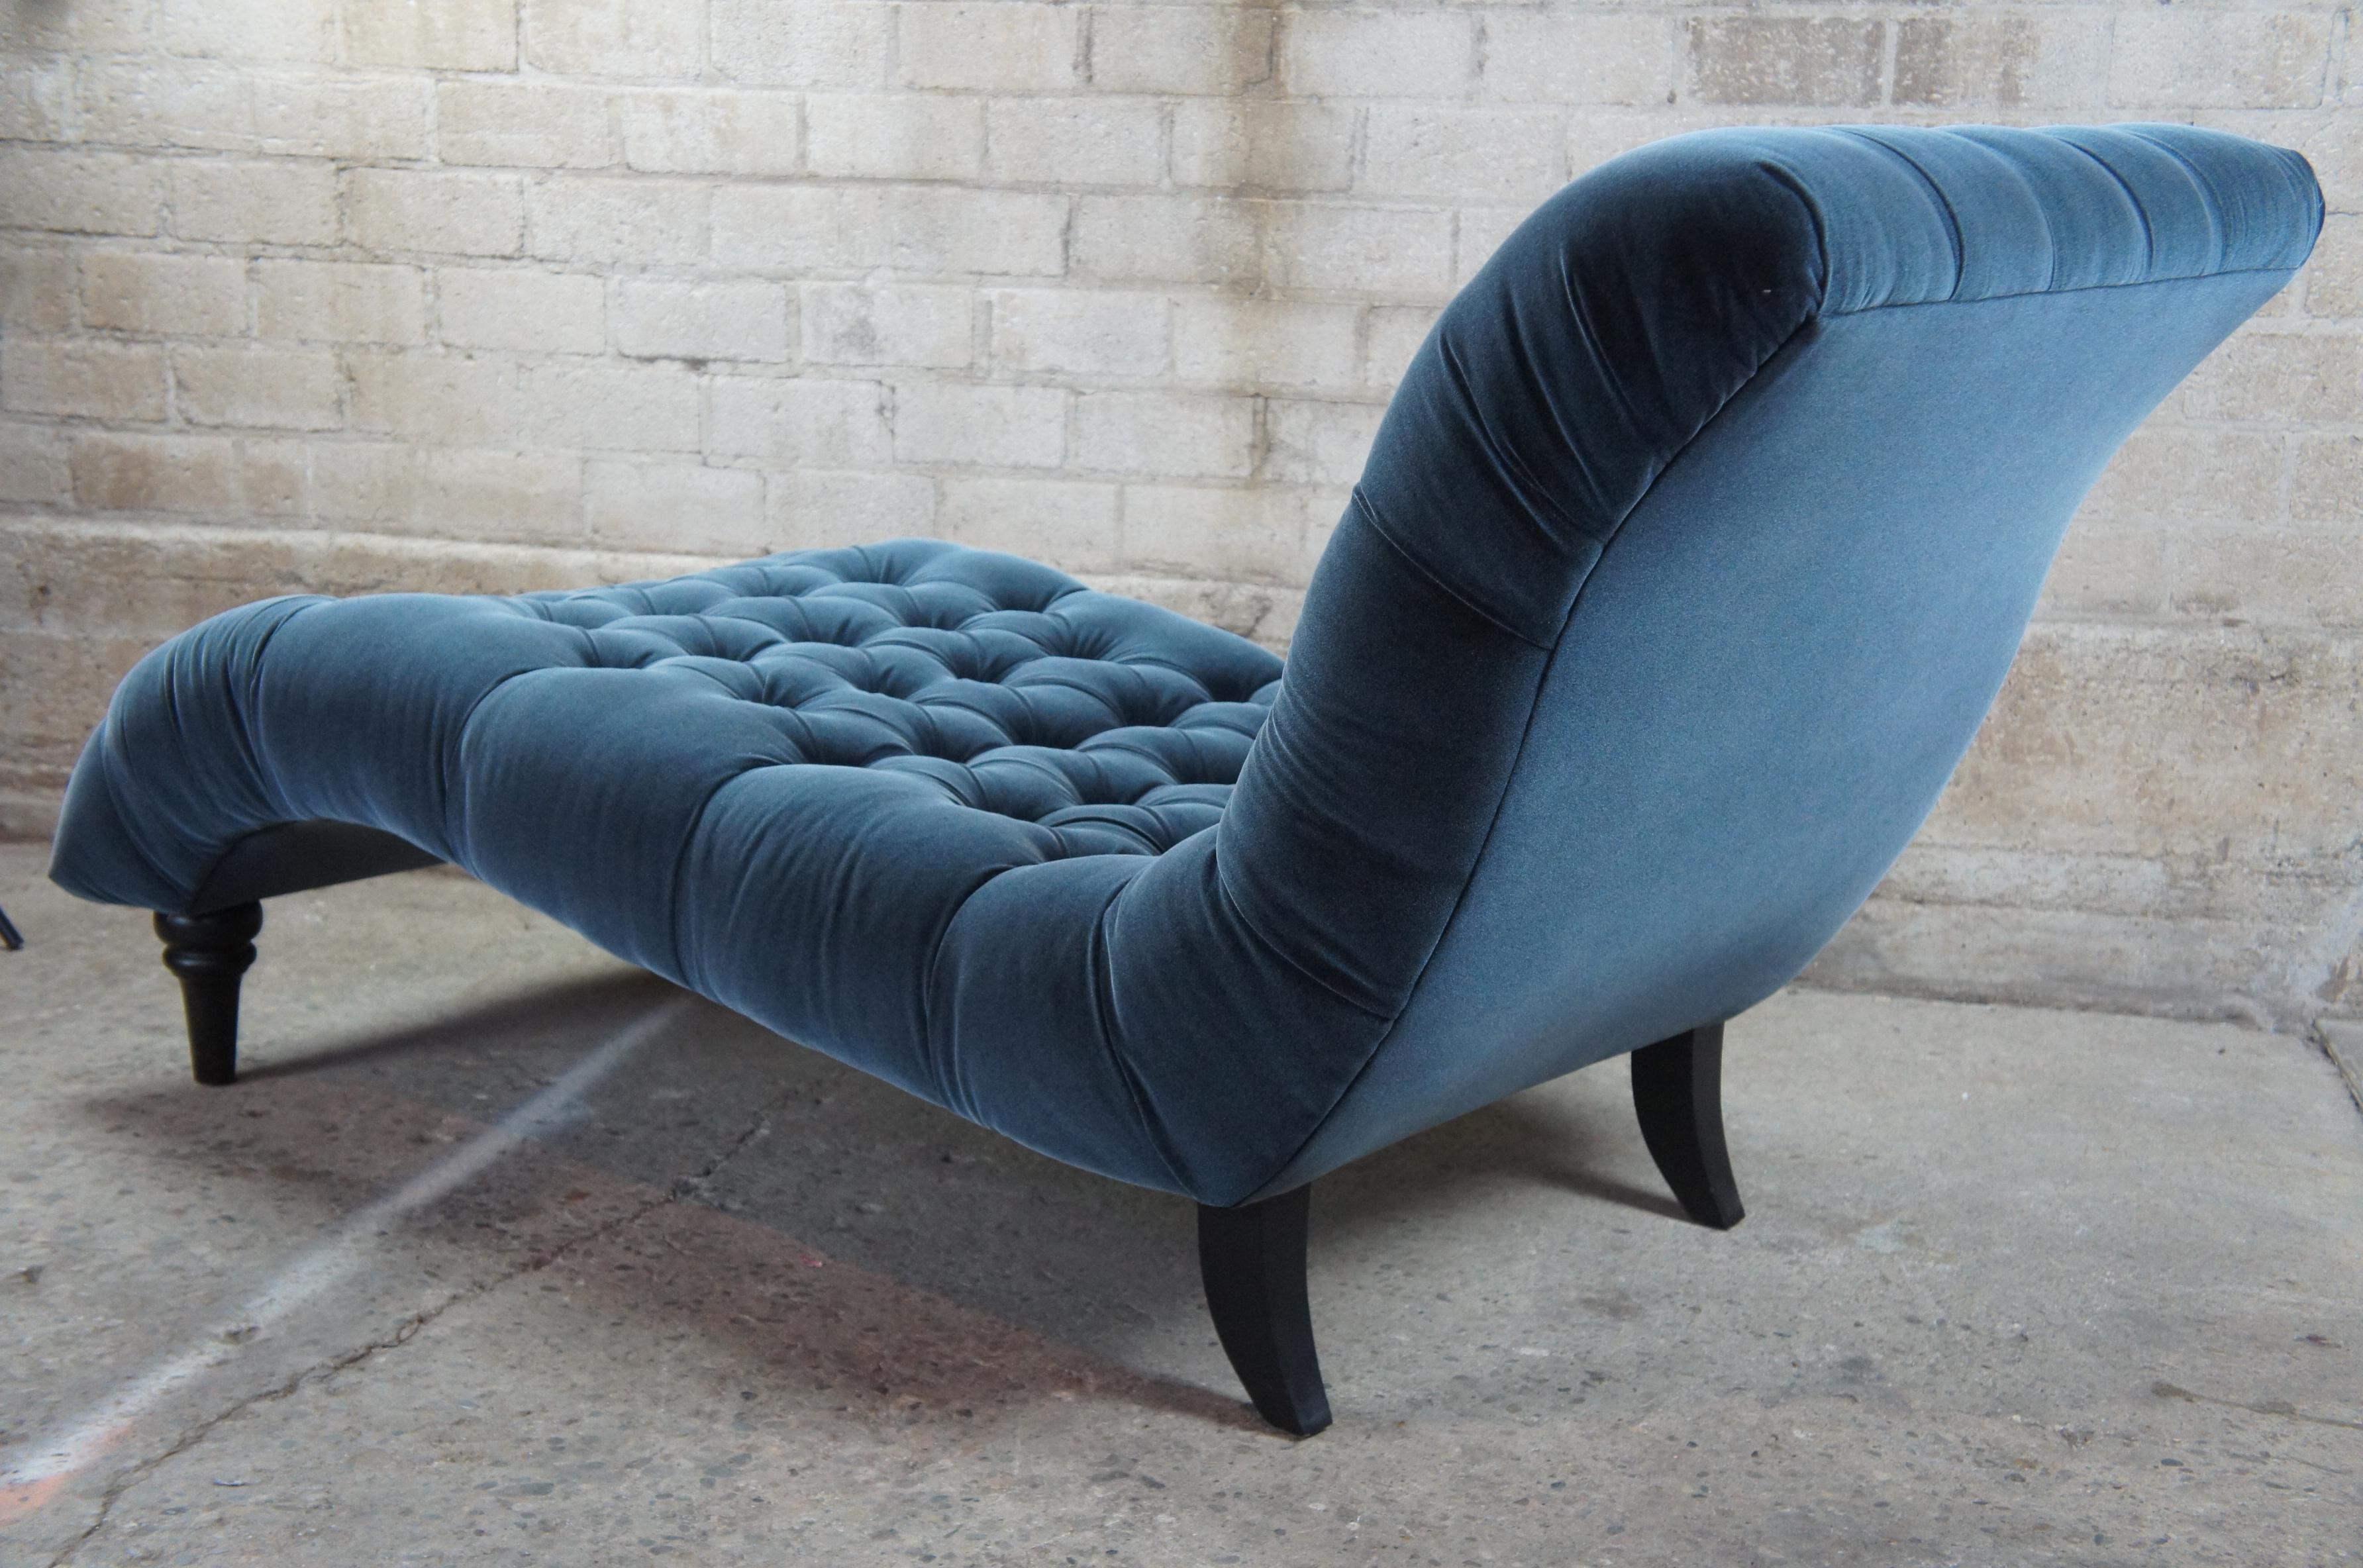 20th Century Arhaus Camden Collection Audrey Tufted Blue Velvet Chaise Lounge Chair